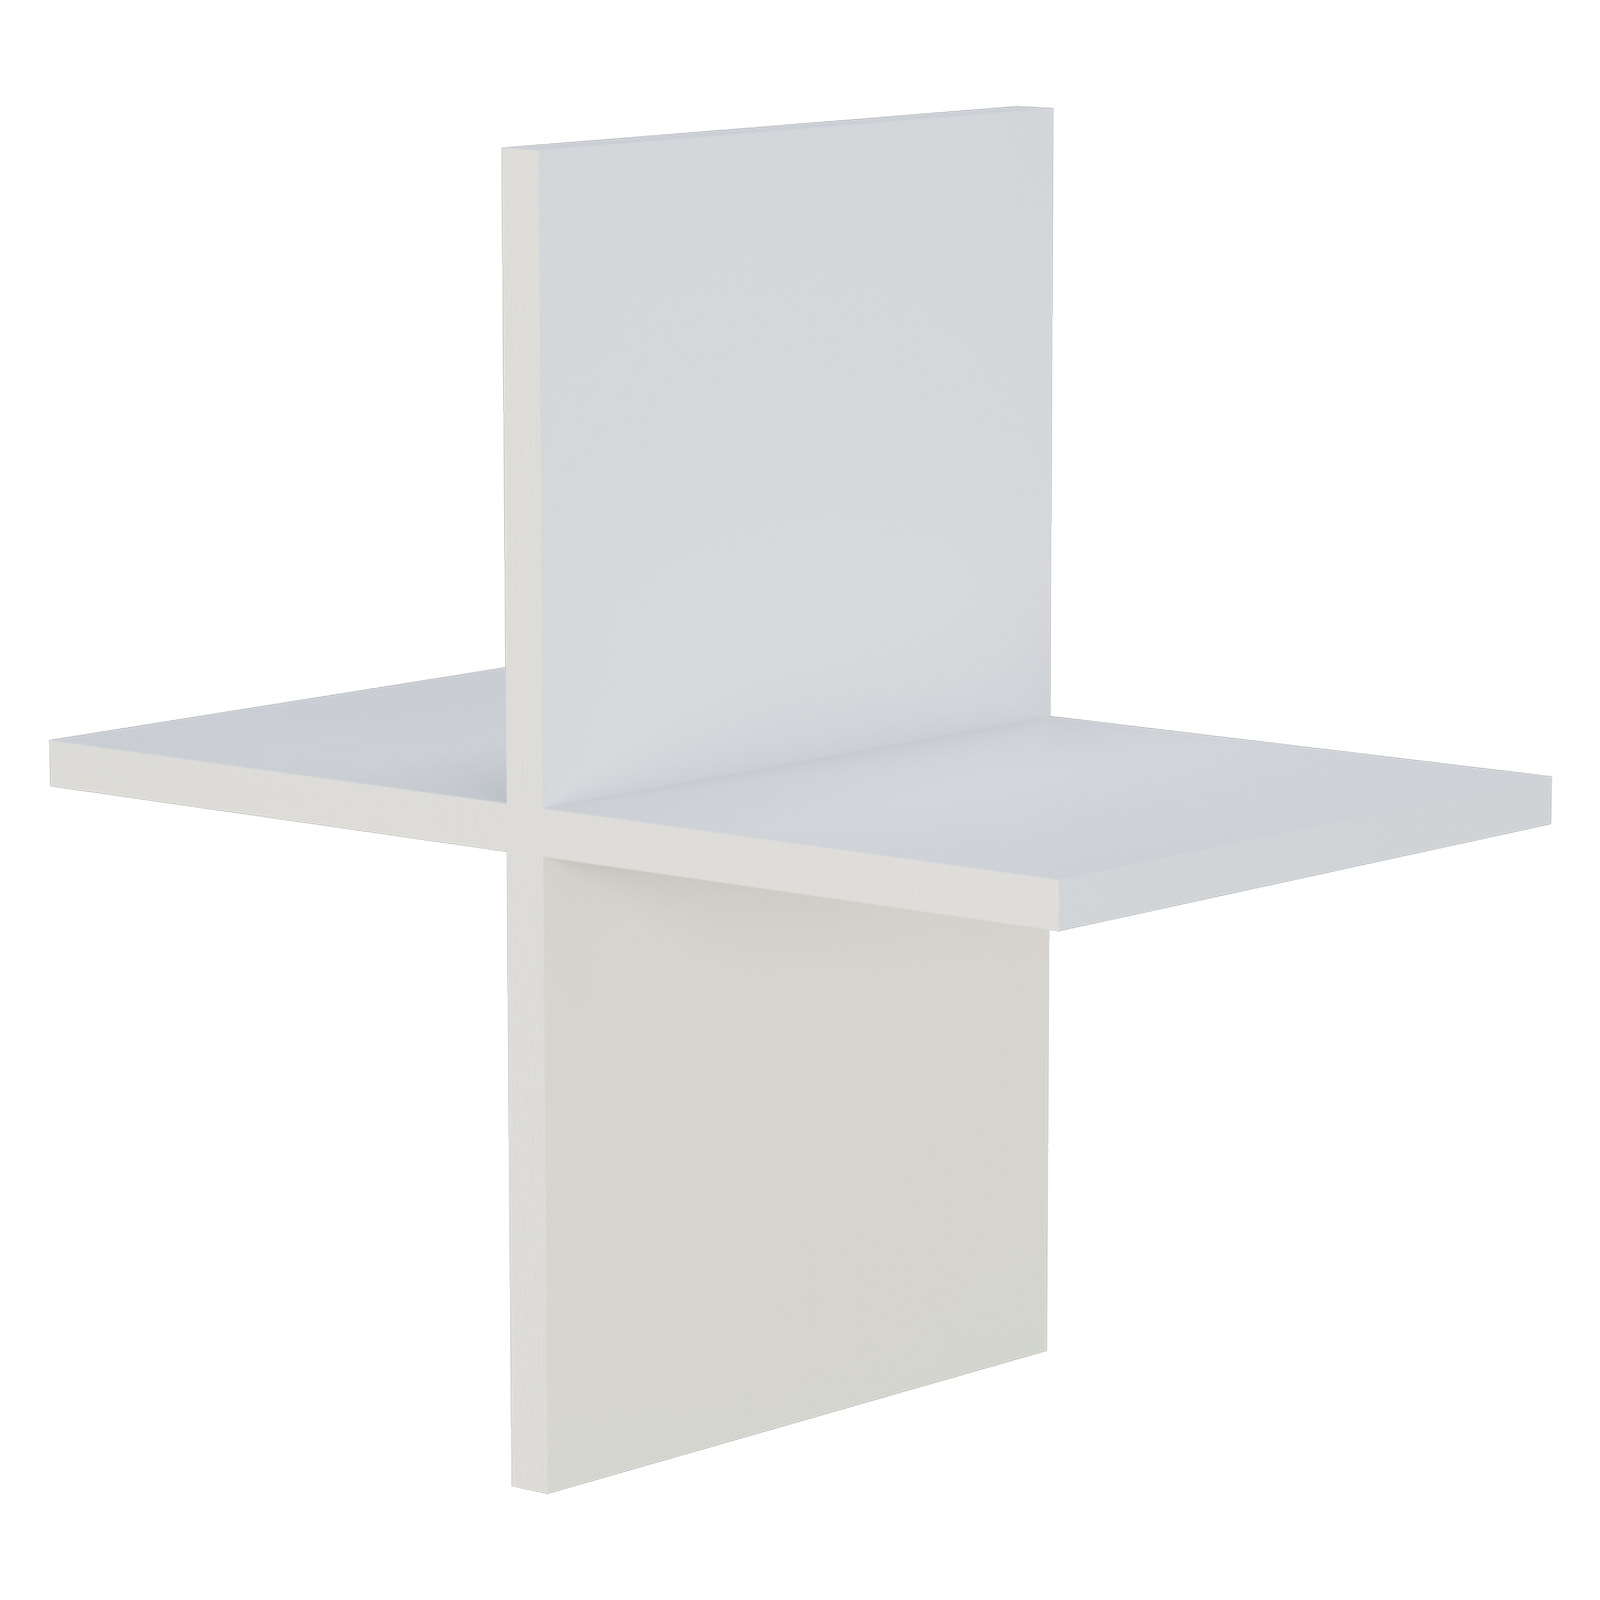 White Large Cube 4 Section Divider